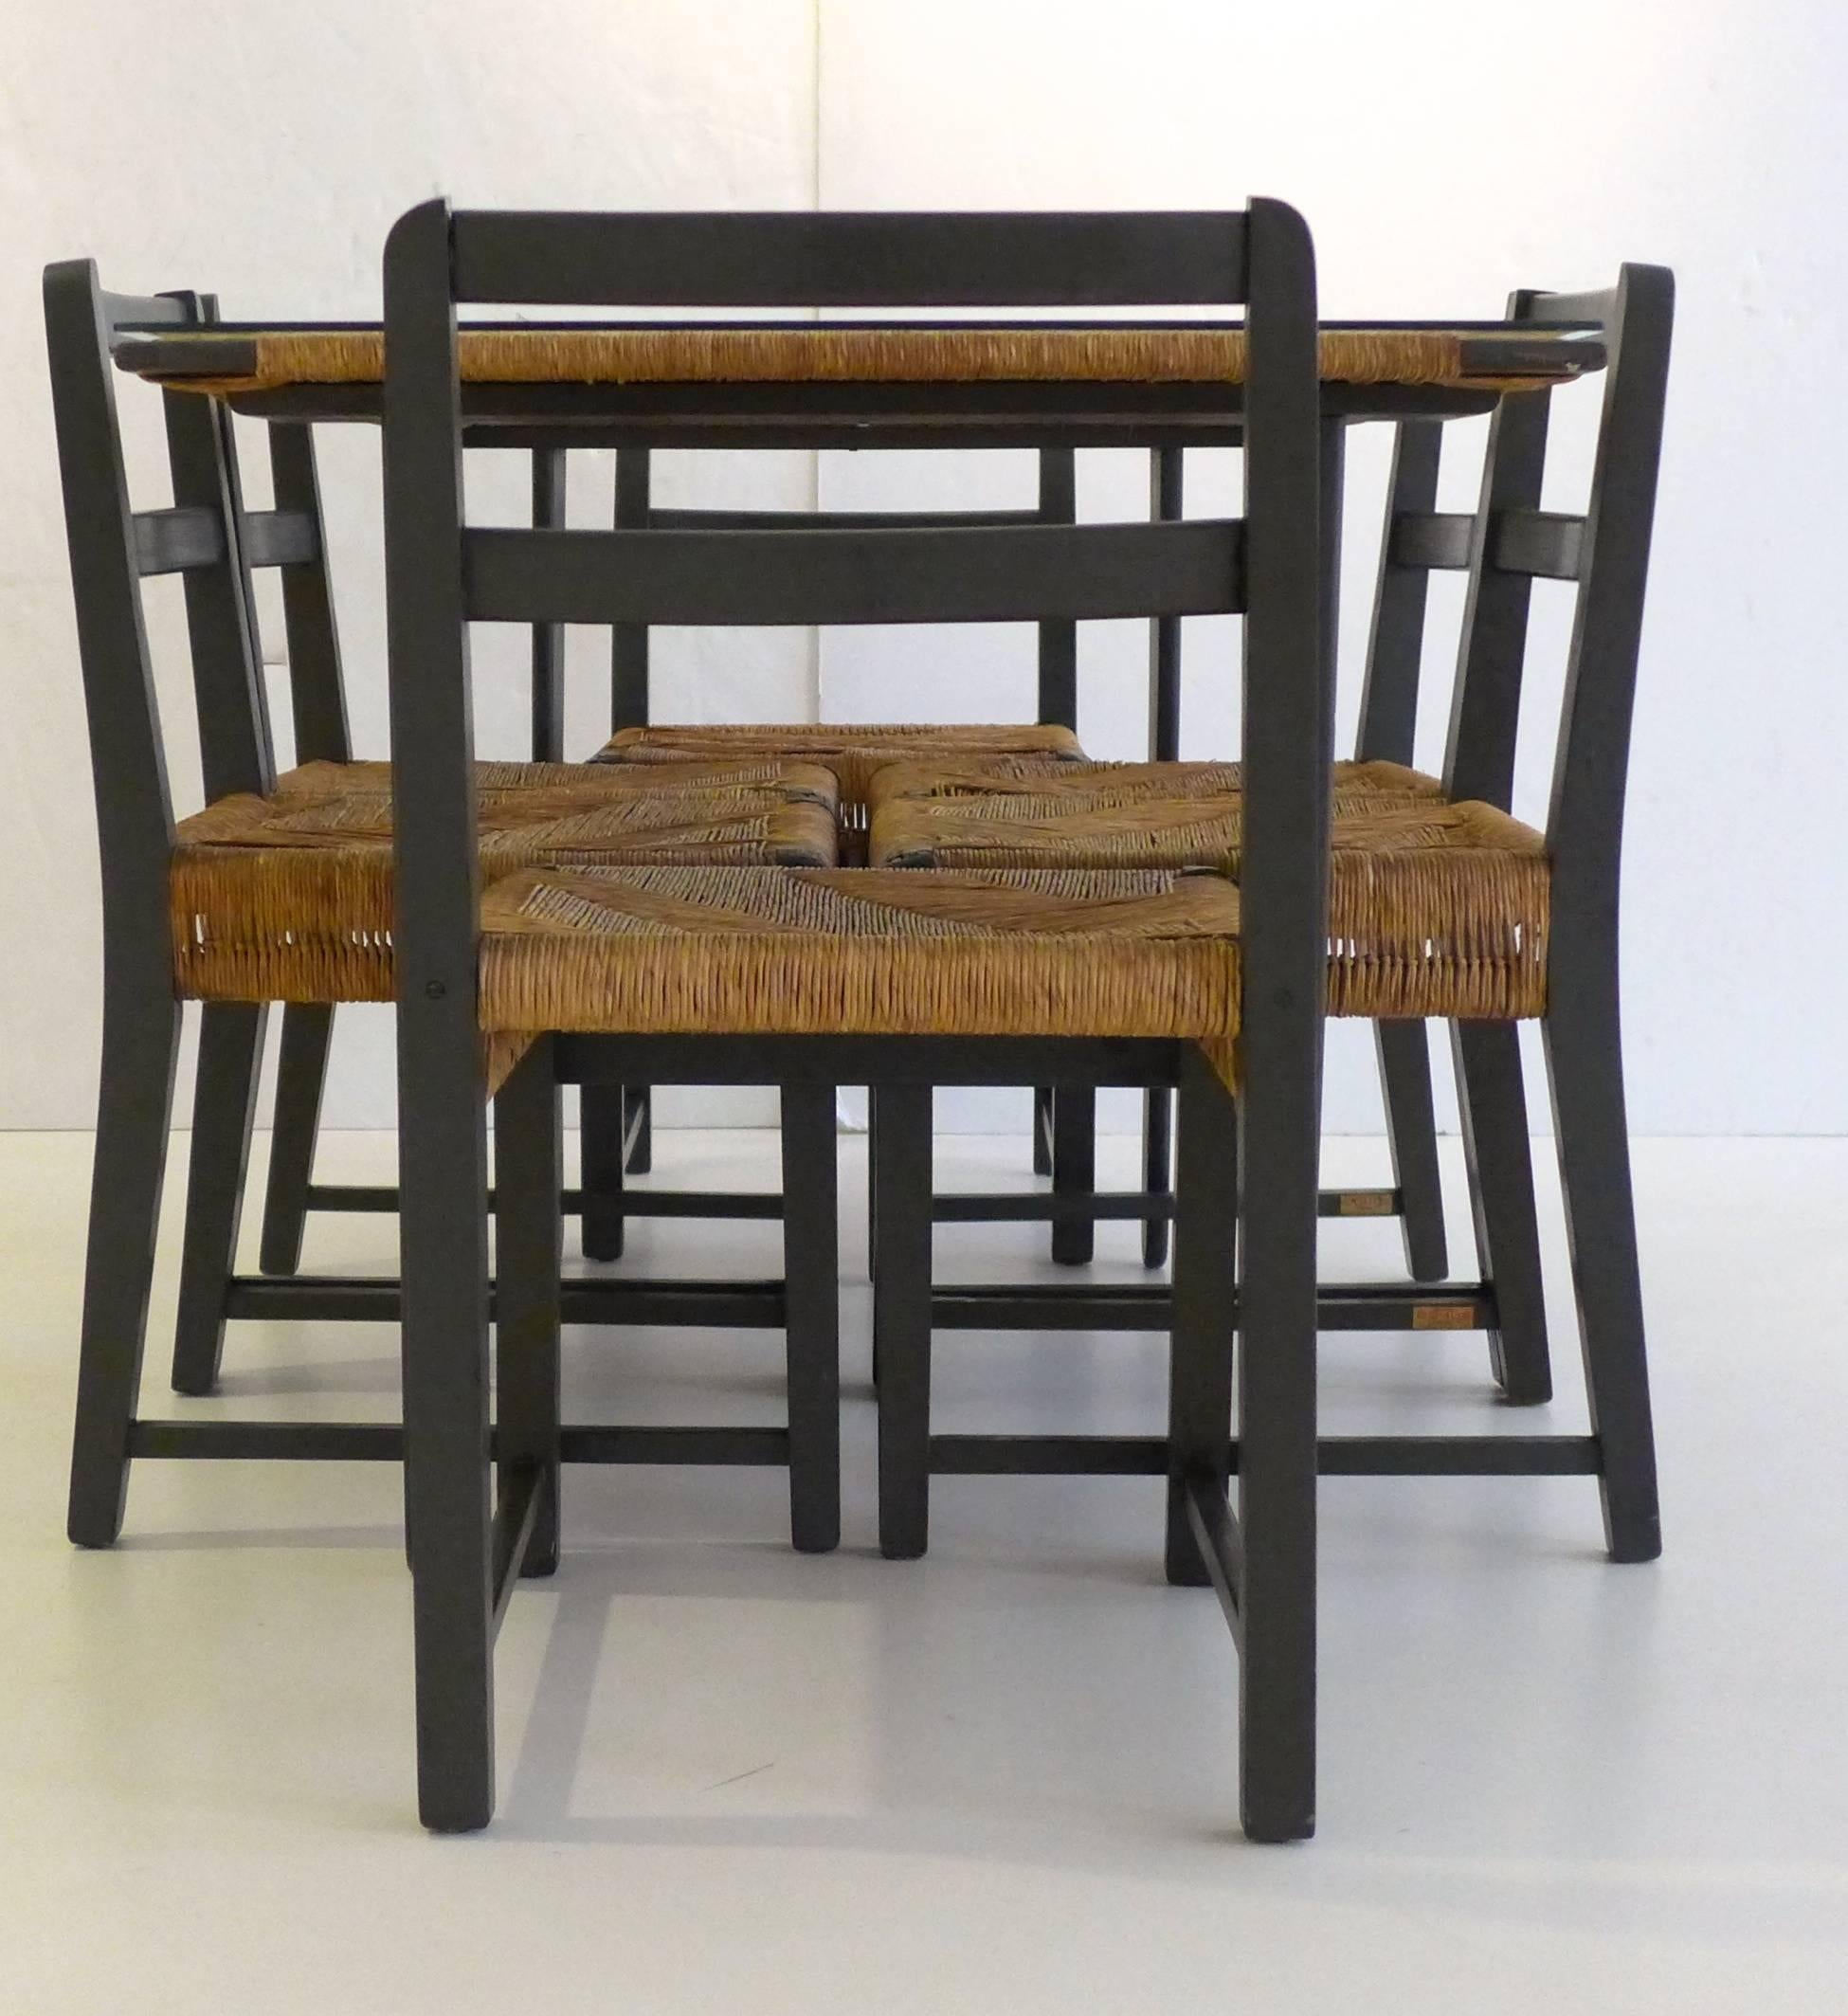 Dining table with six chairs, of painted pine with woven fiber cord. The table top features an open central section surrounded by fiber cord, under a glass panel. The chairs fit tightly within the frame of the table. Designed by Michael van Beuren